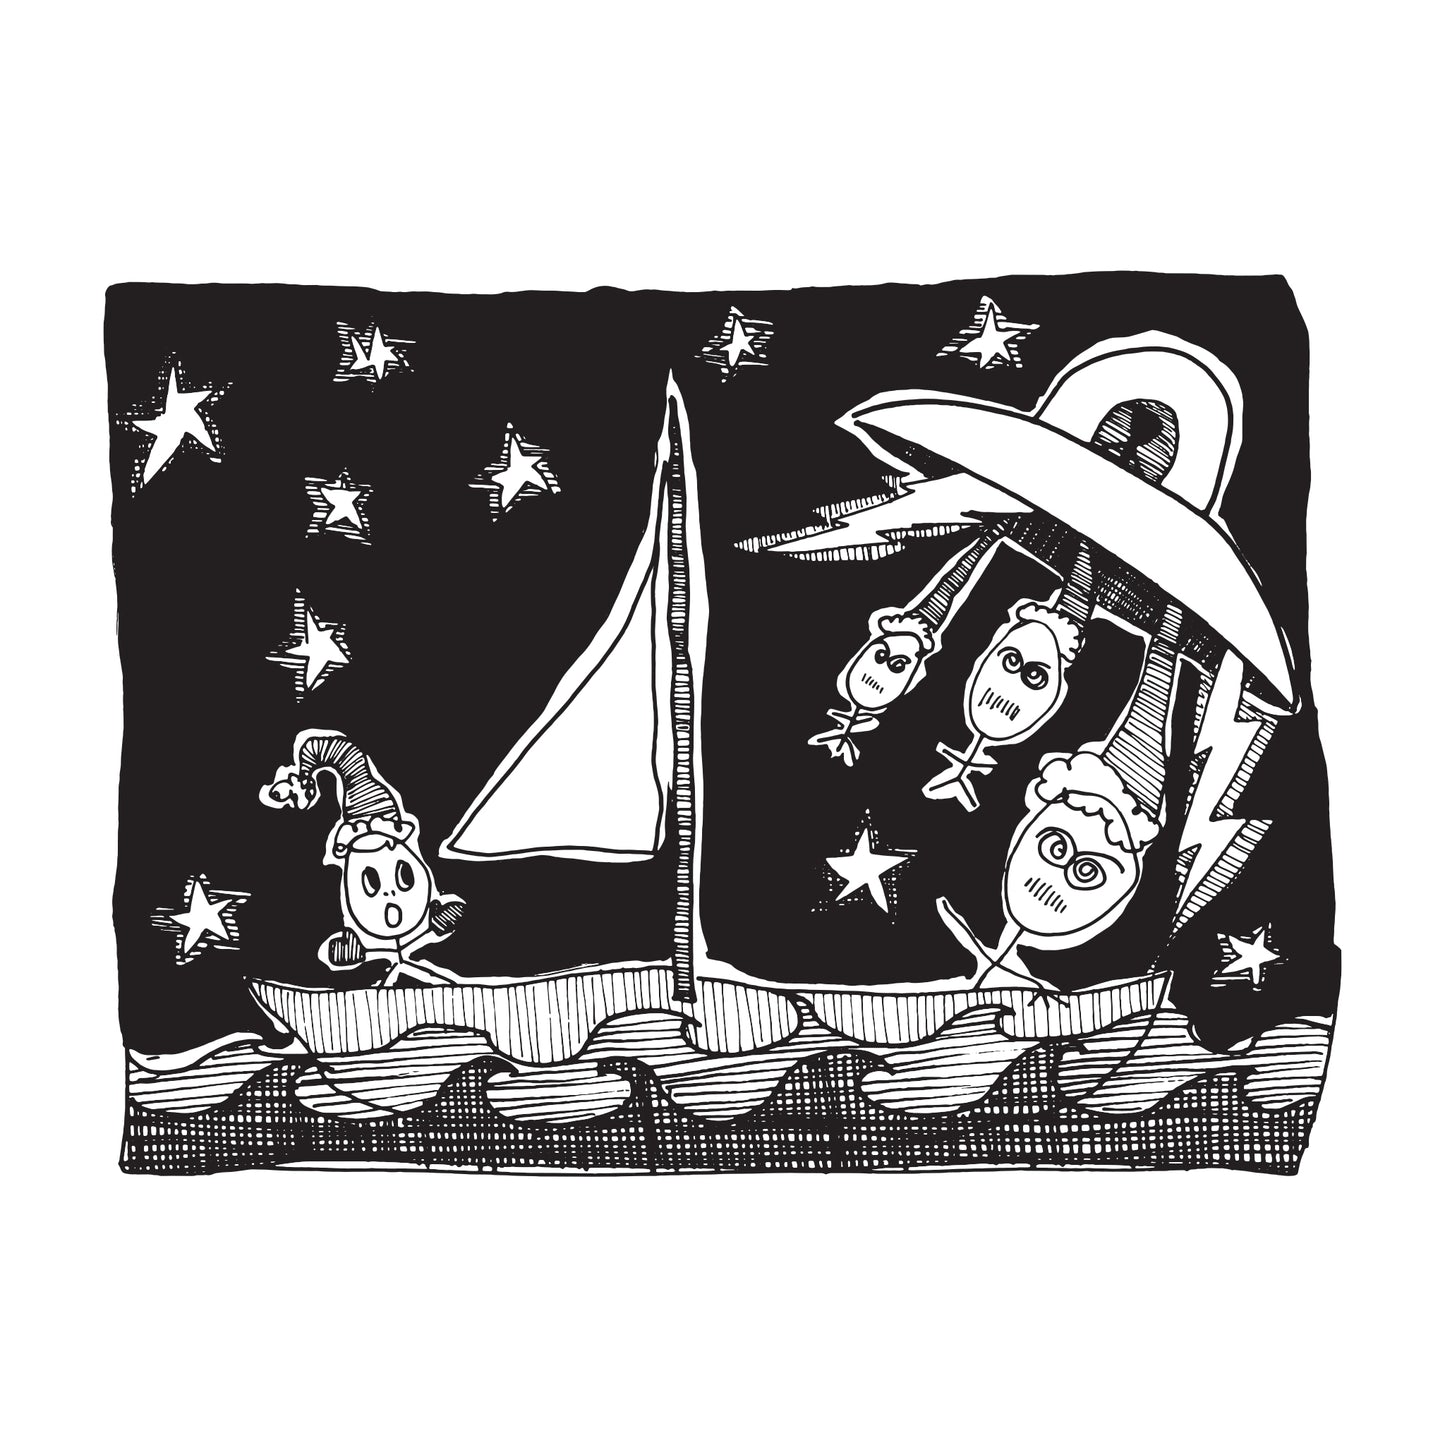 black and white illustration of alien elves sent from a space ship to invade a shocked solo elf's sail boat on a starry night in the middle of the ocean